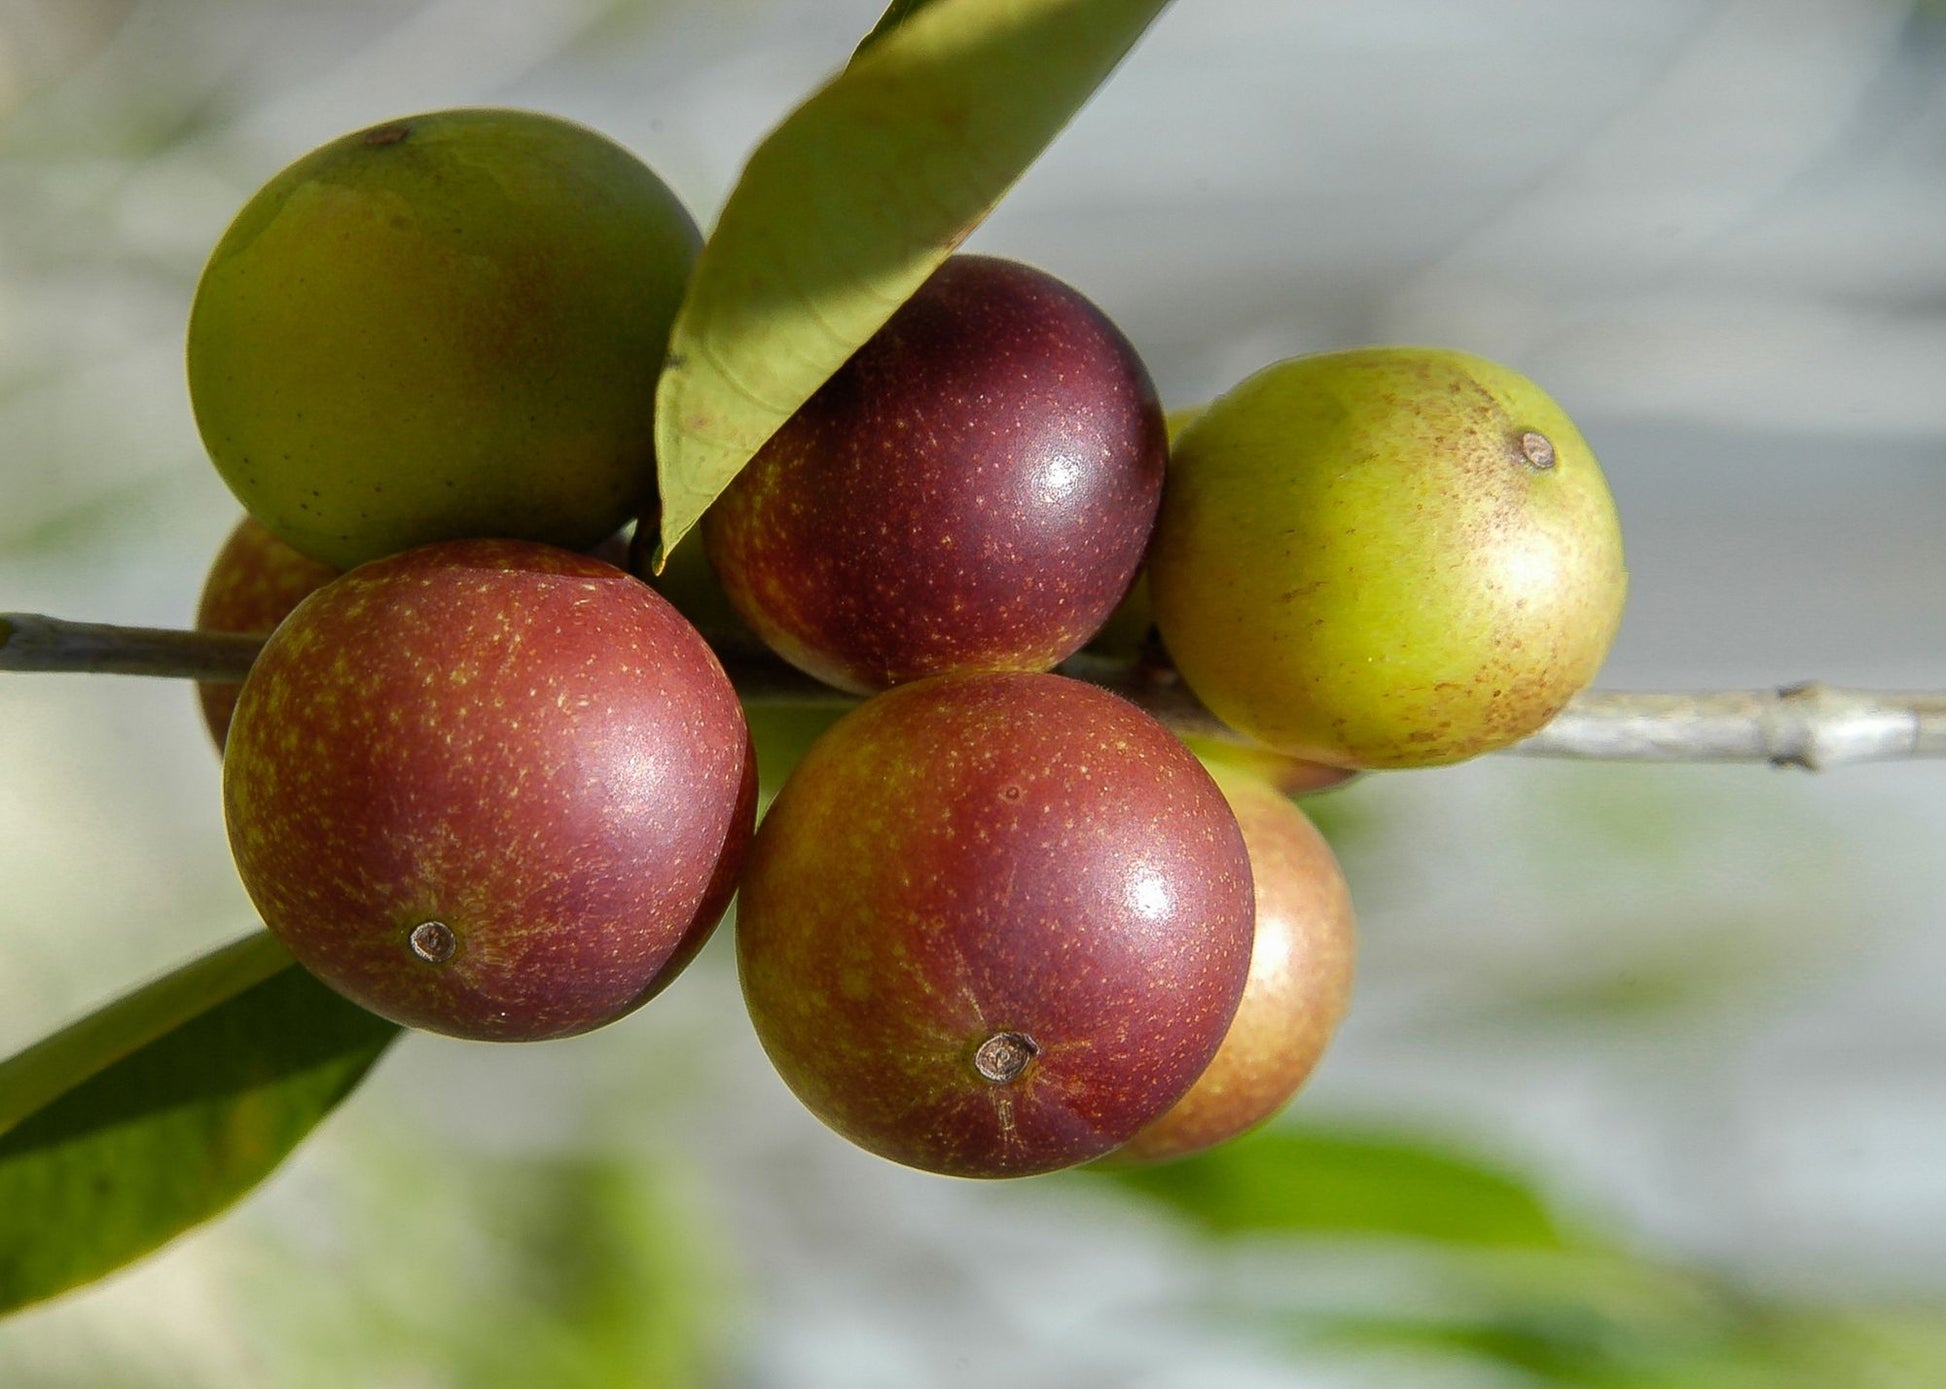 With 60x more vitamin C per serving than an orange, camu camu also fights pigmentation, and its flavonoids help defend against UV rays that cause wrinkles and reddish skin tints. A natural pollution and pollen shield, camu camu is an excellent defense against dry, itchy skin.